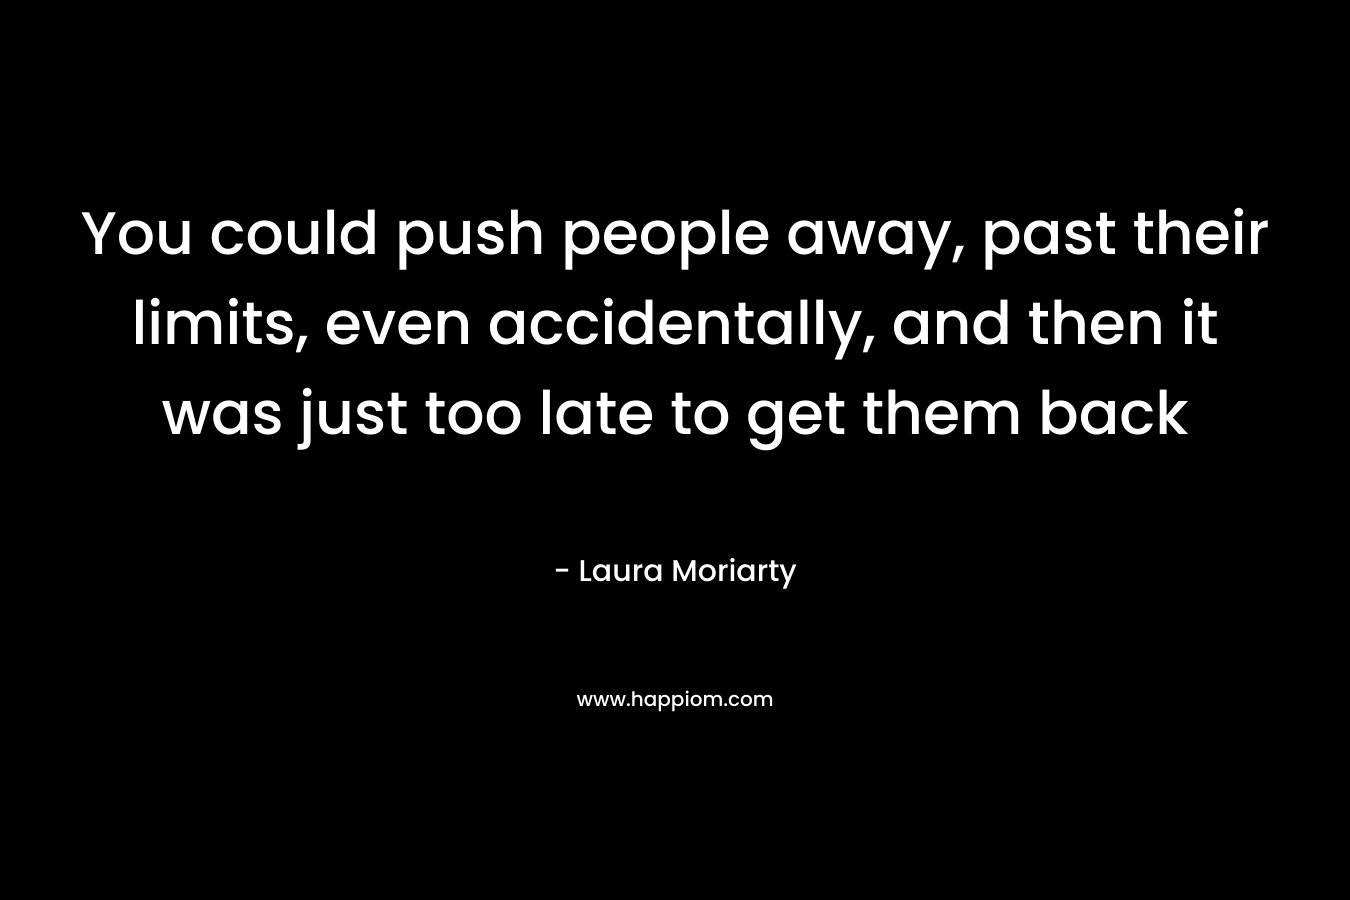 You could push people away, past their limits, even accidentally, and then it was just too late to get them back